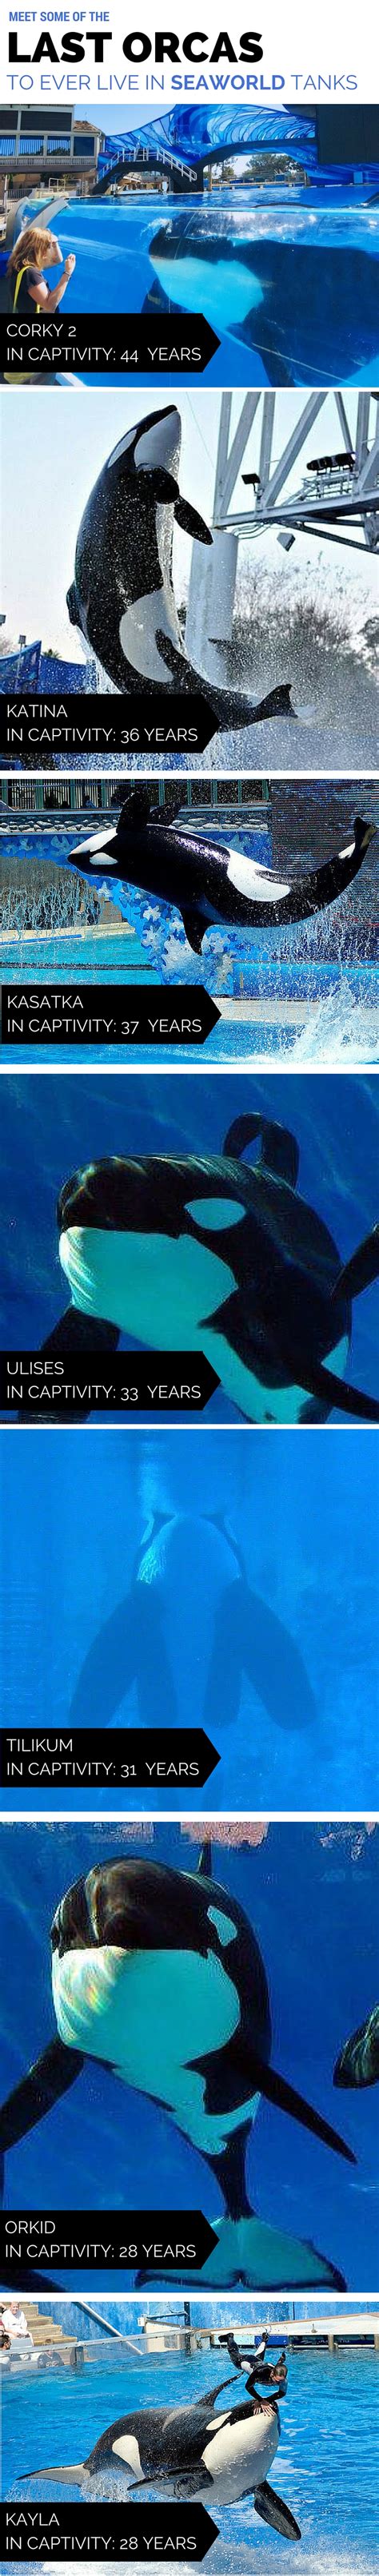 After Years Of Controversy Seaworld Announced That Theyre Ending Their Captive Breeding